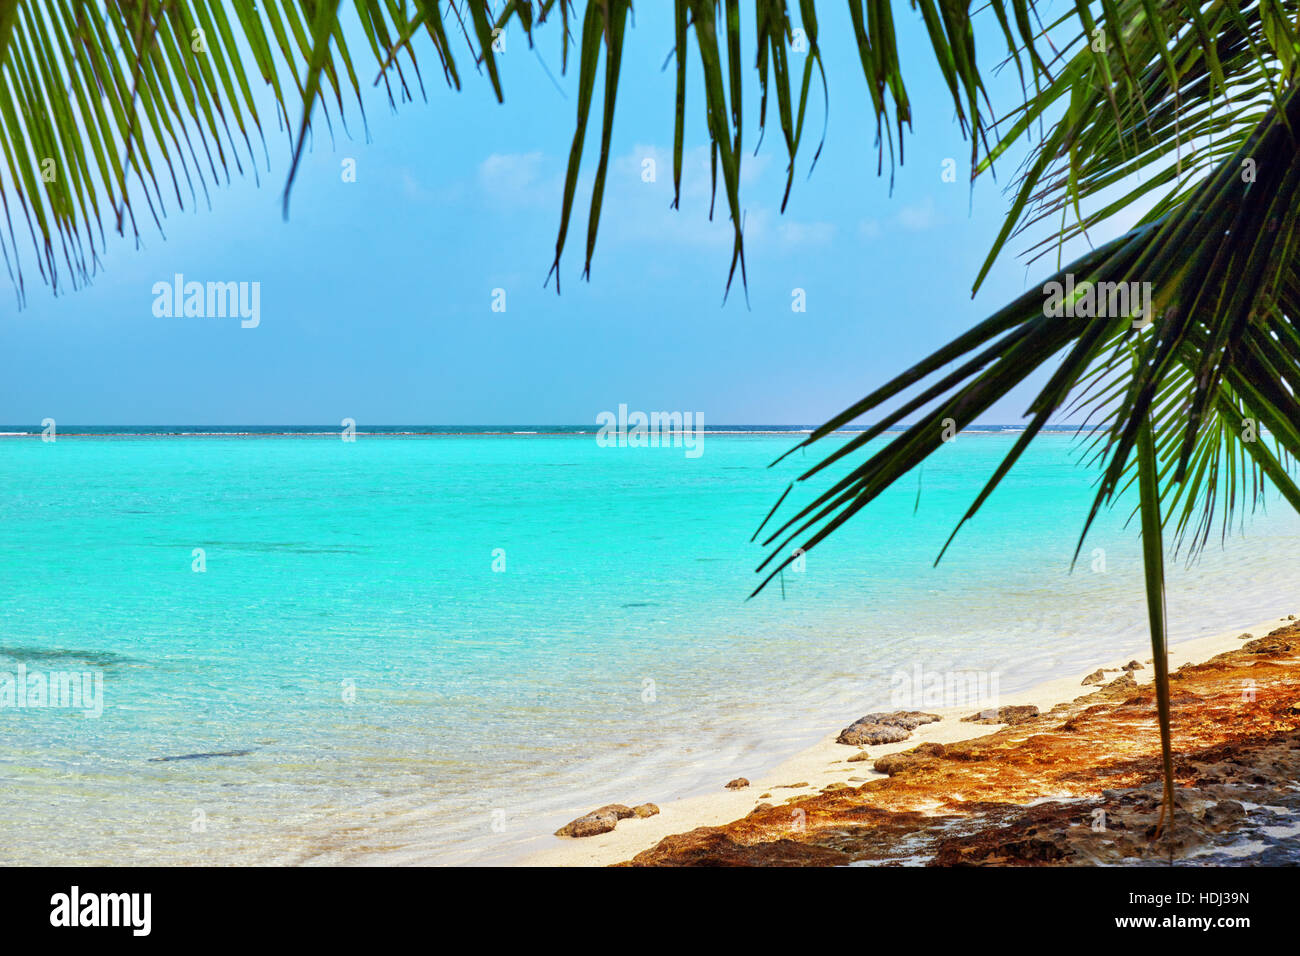 Shoreline of a tropical island in the Maldives and view of the Indian Ocean. Stock Photo